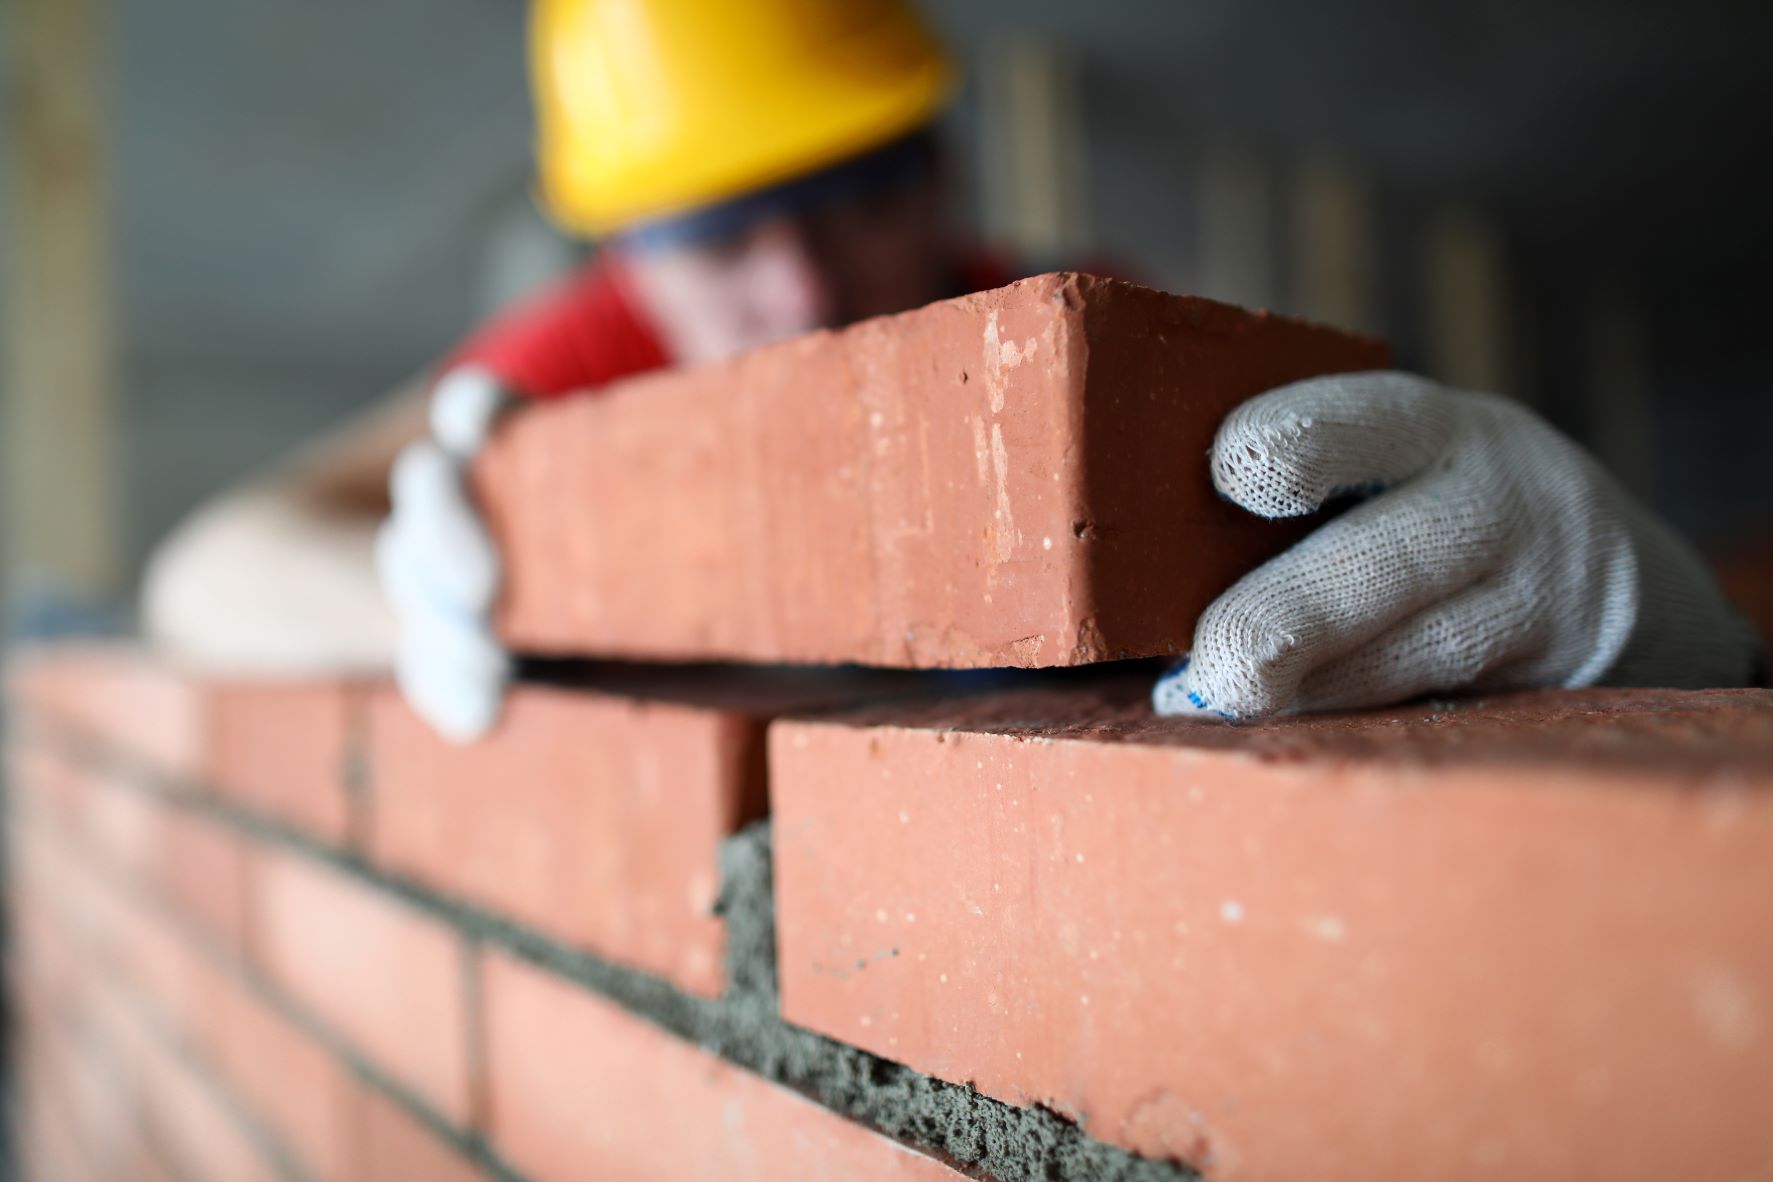 close-up-professional-construction-worker-laying-bricks-industrial-site-builder-protective-uniform-man-building-wall-with-blocks-renovation-concept.jpg